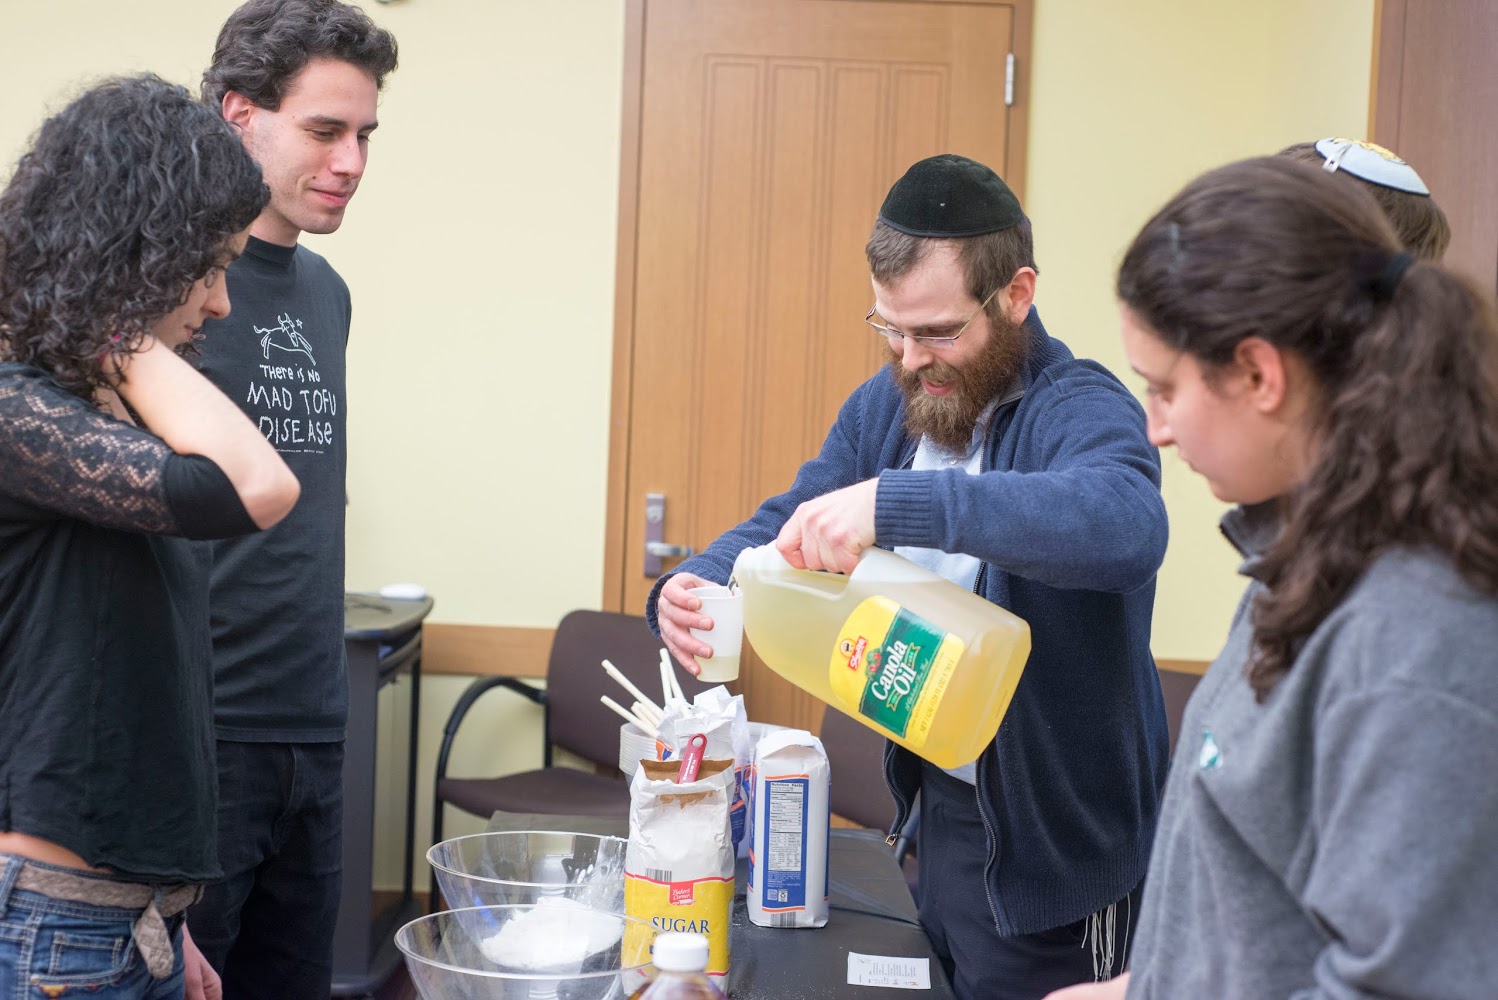 About 30 students gathered in Usdan 110 on March 2 to celebrate the coming of Purim by making hamantaschen. The triangular cookies are filled with a sweet filling, usually made of poppy seeds, and are traditionally eaten during the Purim holiday, which begins on the evening of March 4. Matt Renetzky ’18 and Rabbi Levi Schectman organized the event through Chabad at Wesleyan along with help from Elli Scharlin '18 and Aaron Josephs '18.